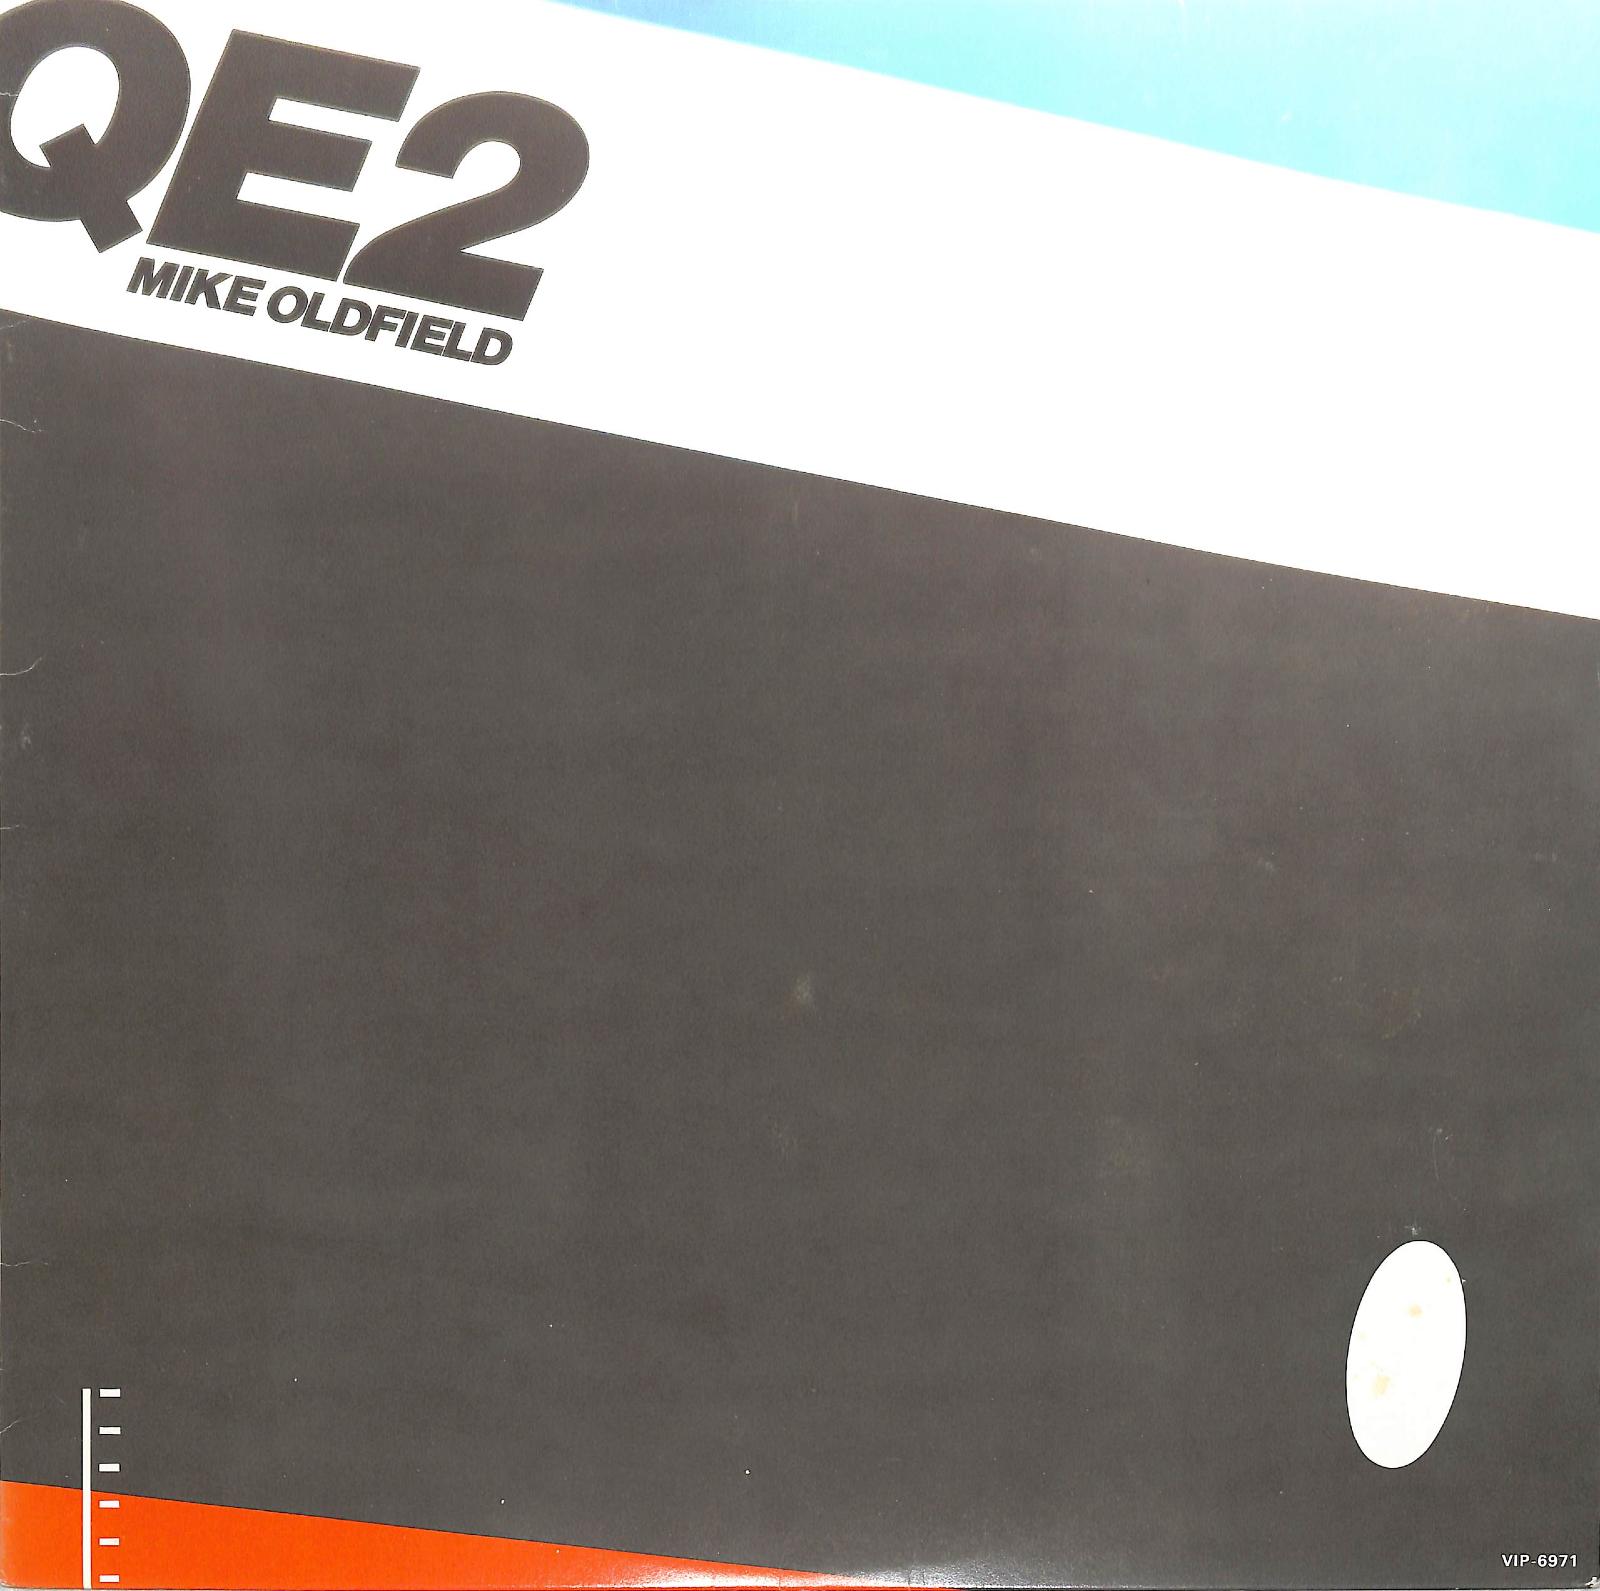 MIKE OLDFIELD - QE2